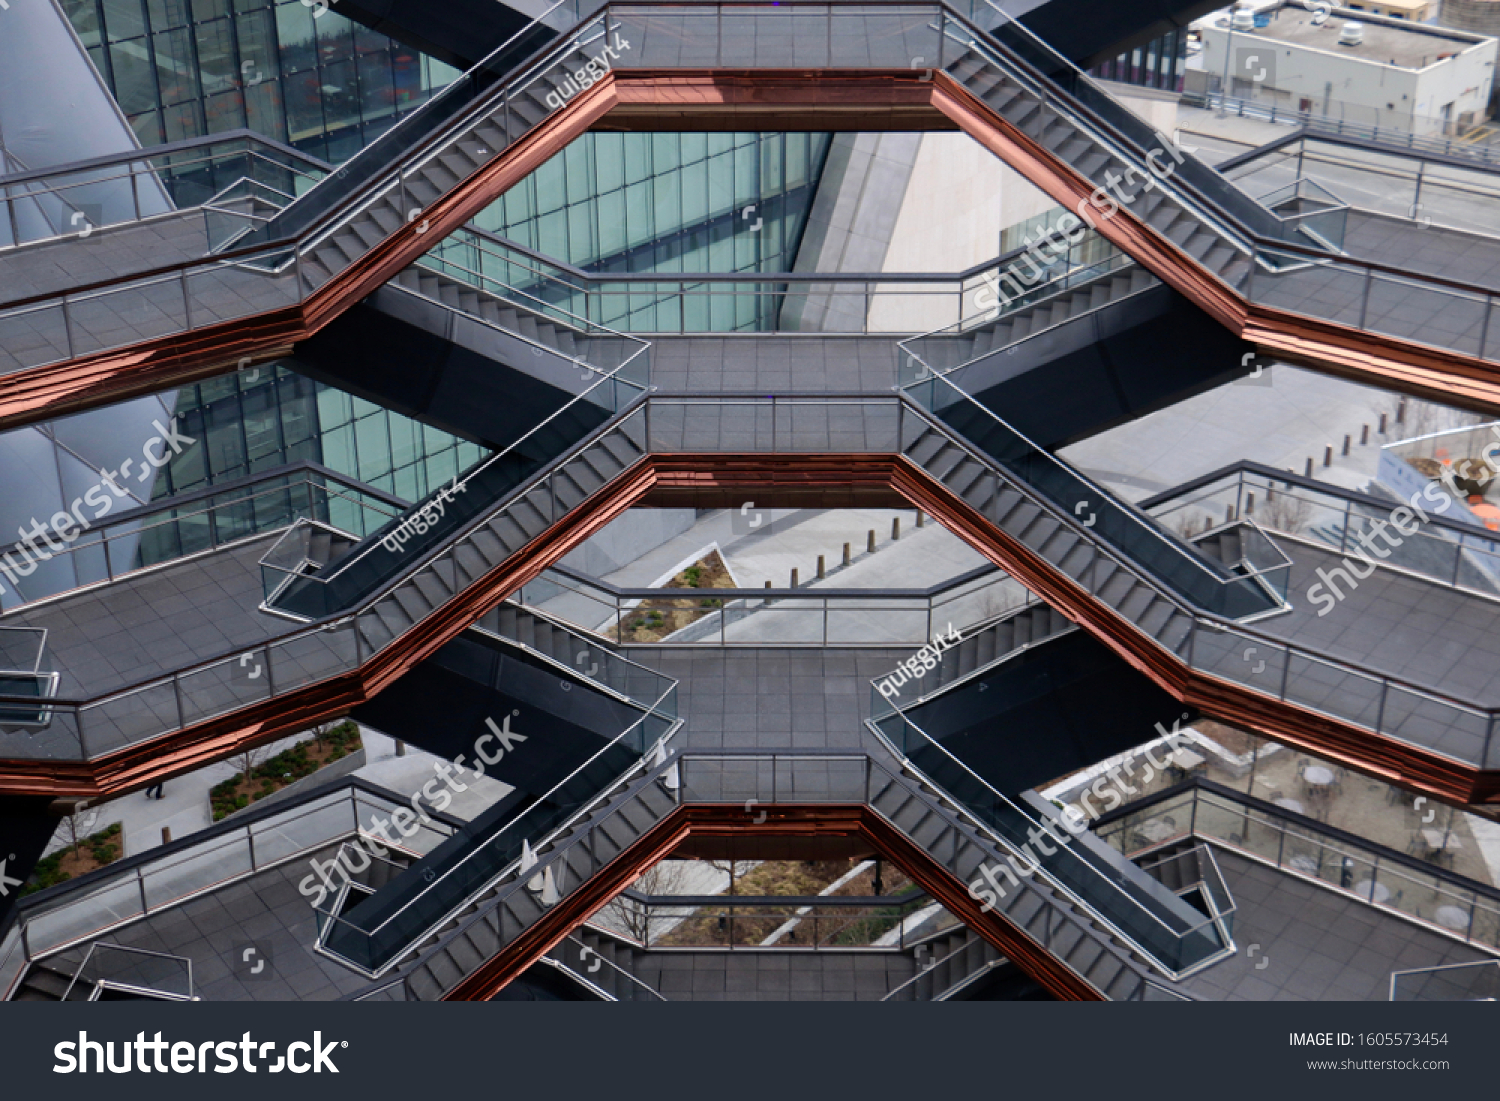 New York, NY - January 1 2020: View of the stairways inside the Thomas Heatherwick designed Vessel sculpture at Hudson Yards #1605573454